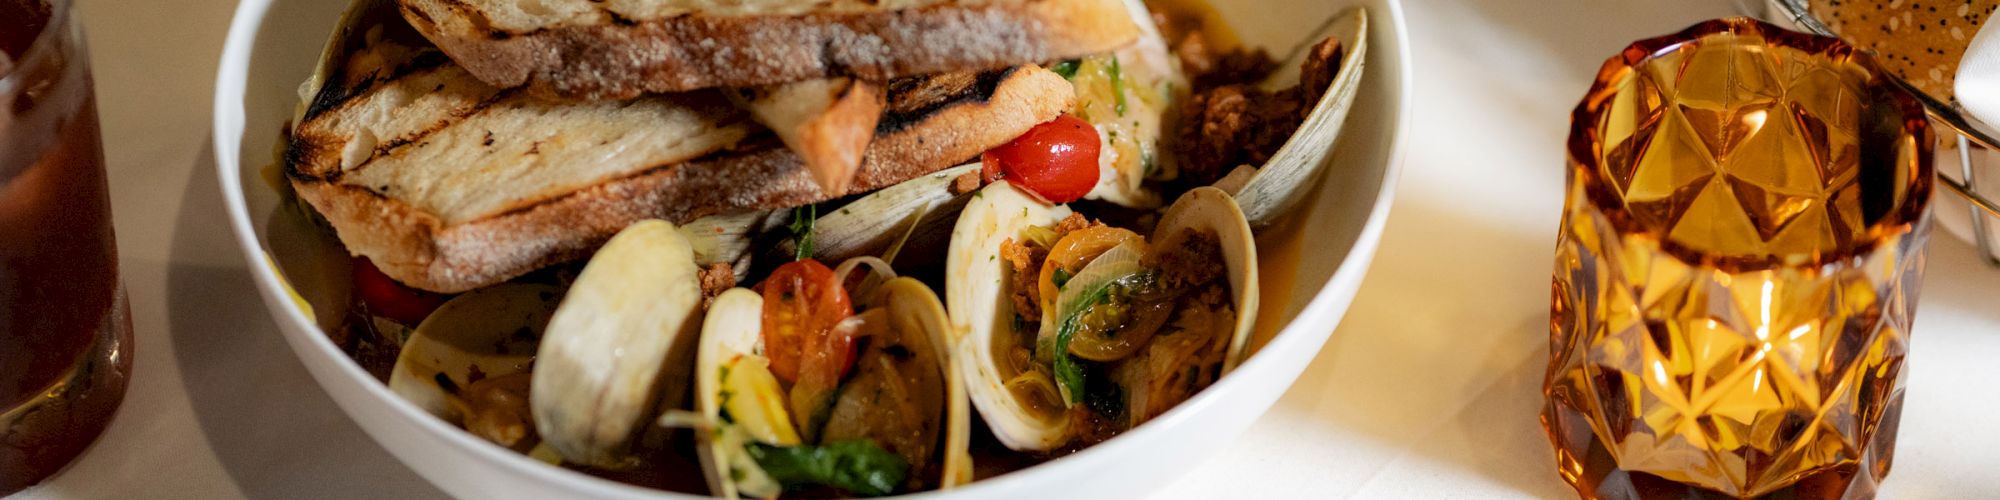 A bowl of seafood pasta with grilled bread, surrounded by drinks, a bread basket, and additional plates on a dining table.